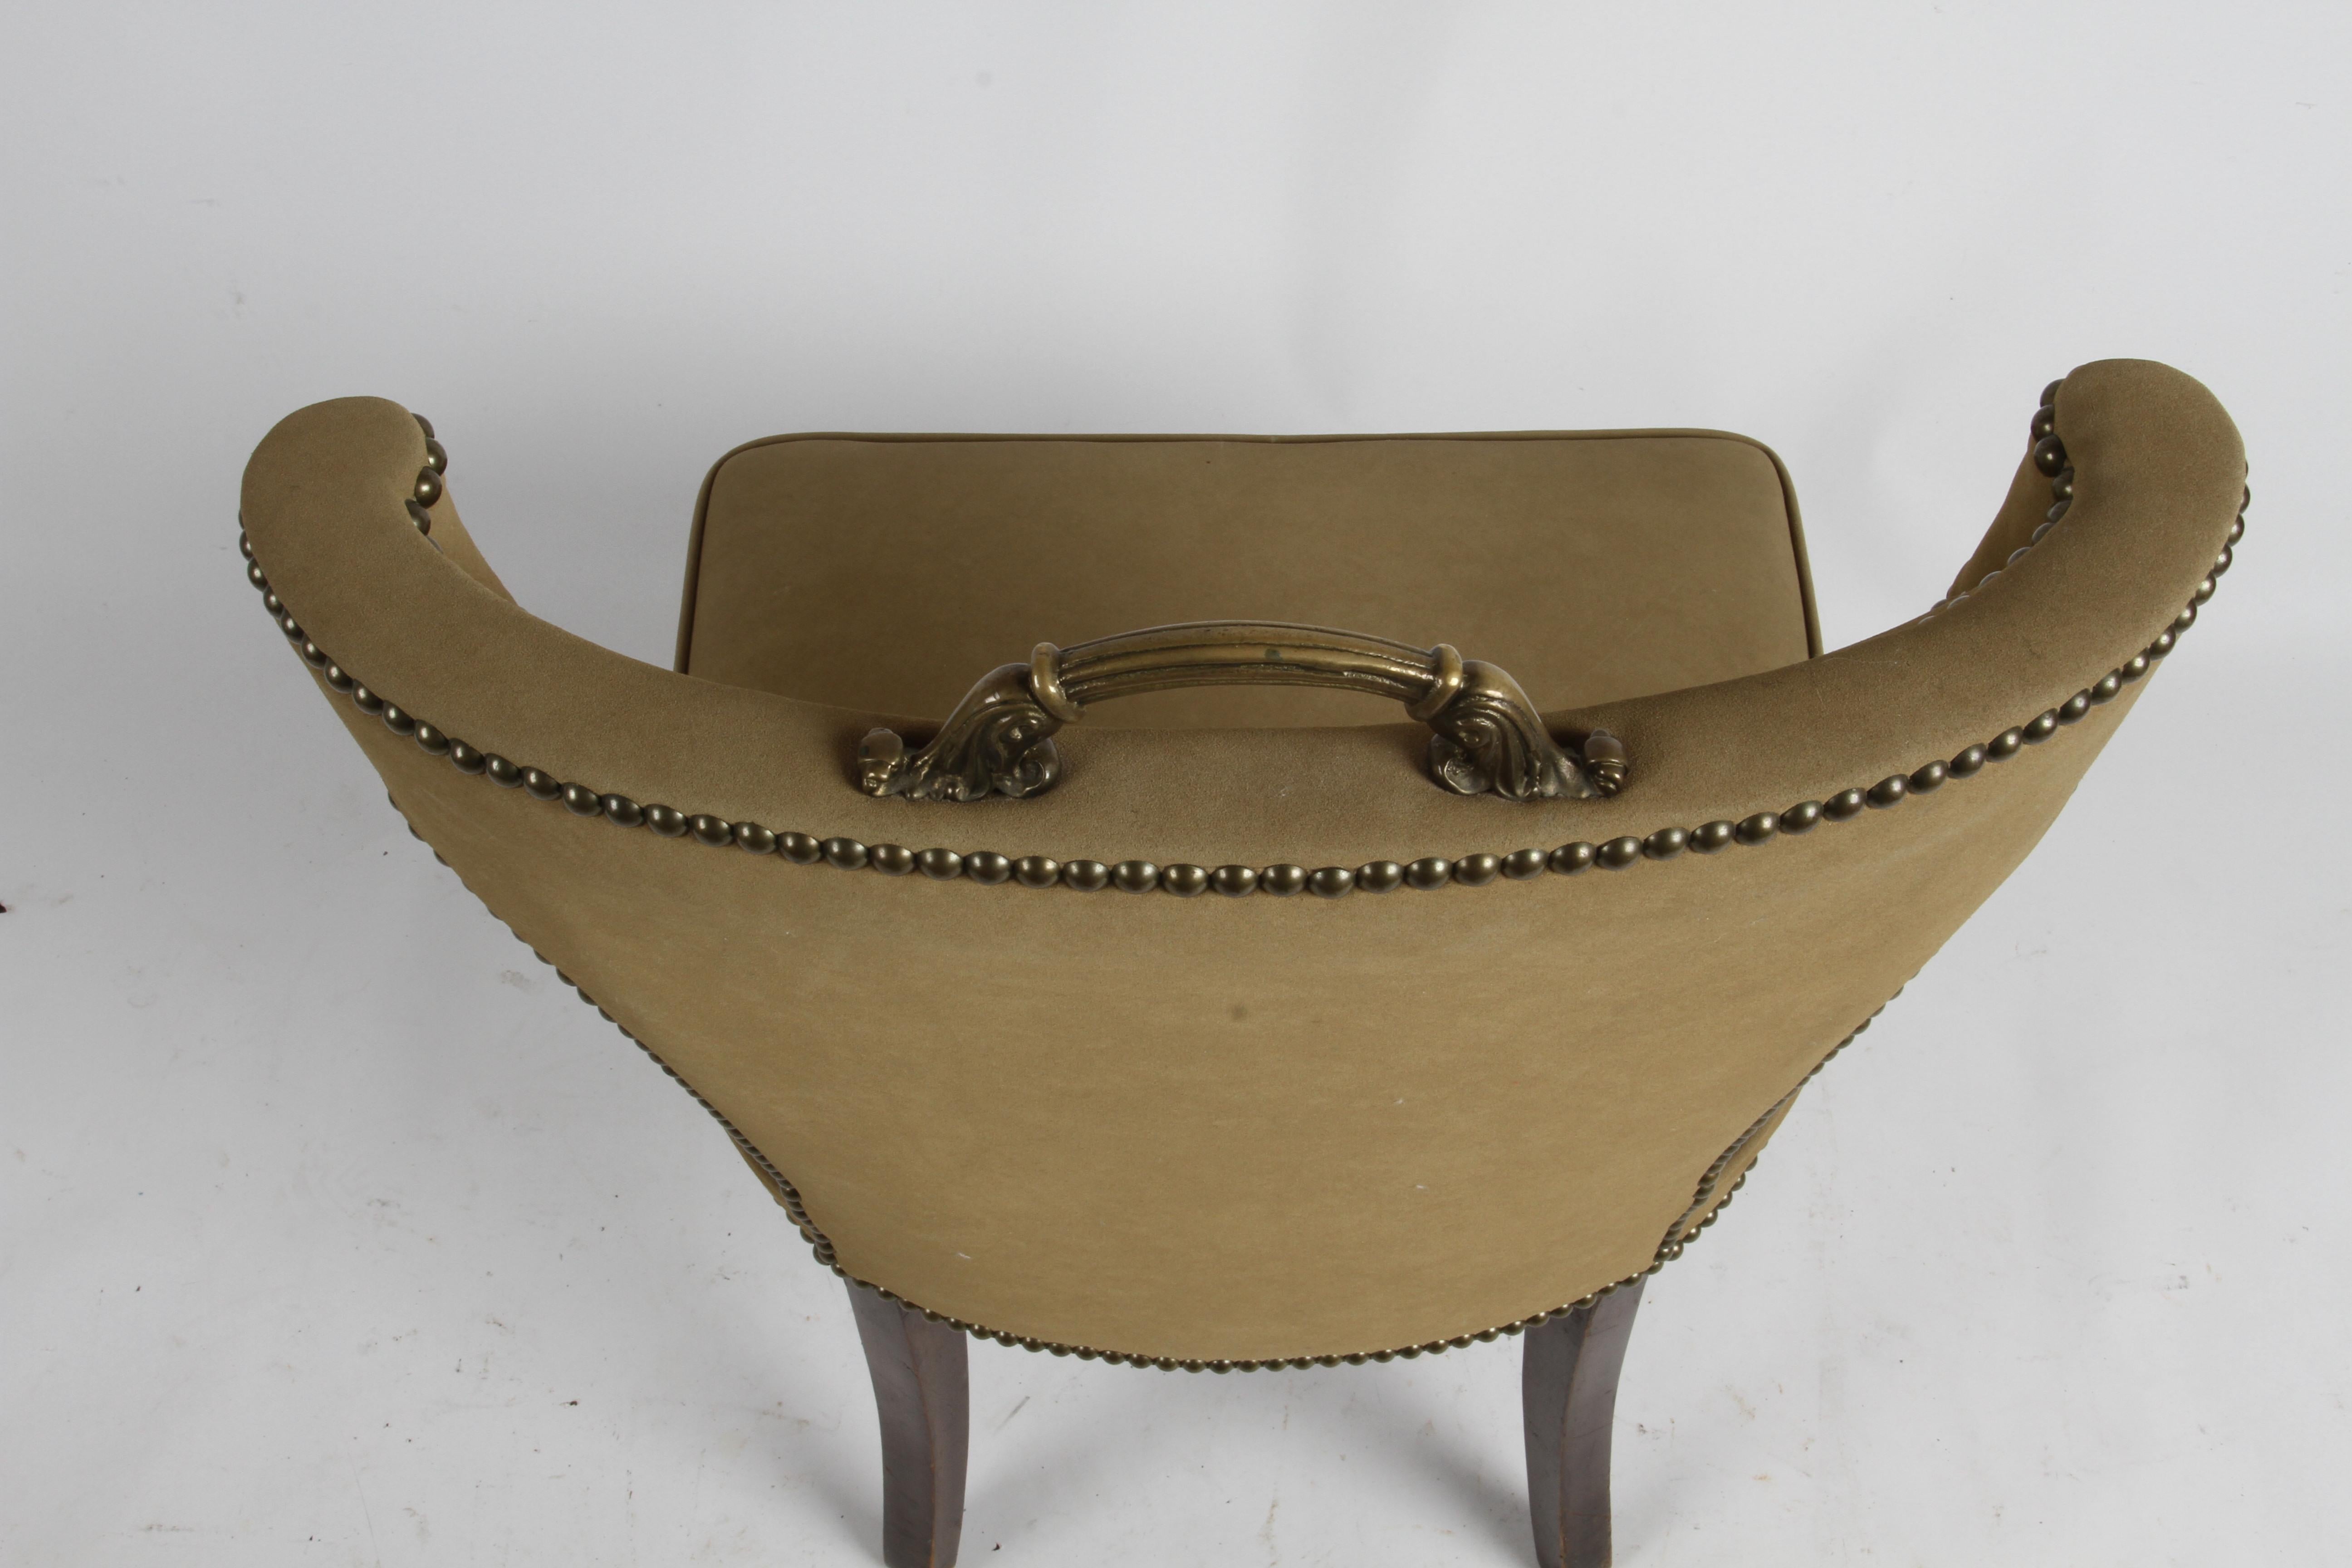 1940s Hollywood Regency Tan Suede Desk Chair with Brass Handle & Nailhead Trim For Sale 4